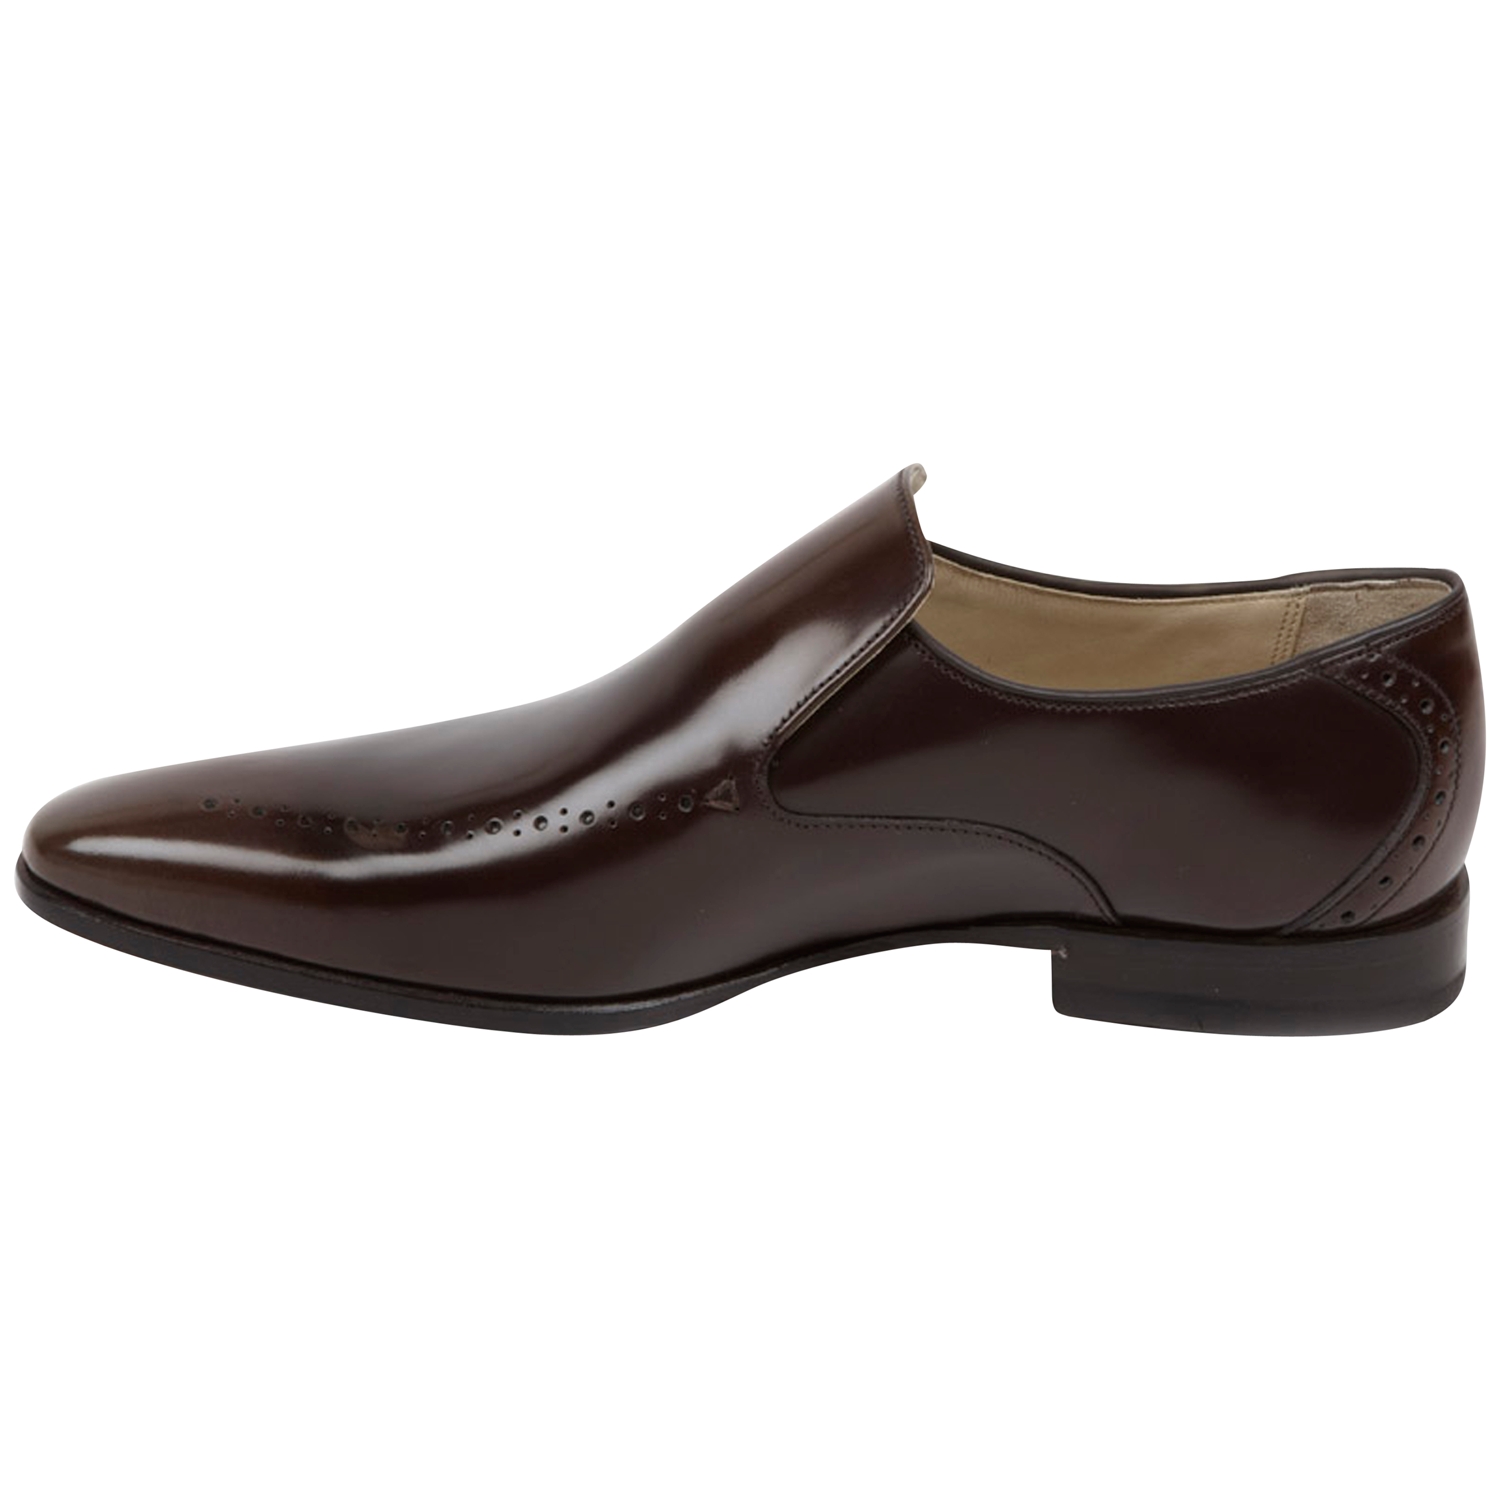 Oliver Sweeney Oliver Sweeney Pirie Leather Brogue Slip On Shoes Brown ...